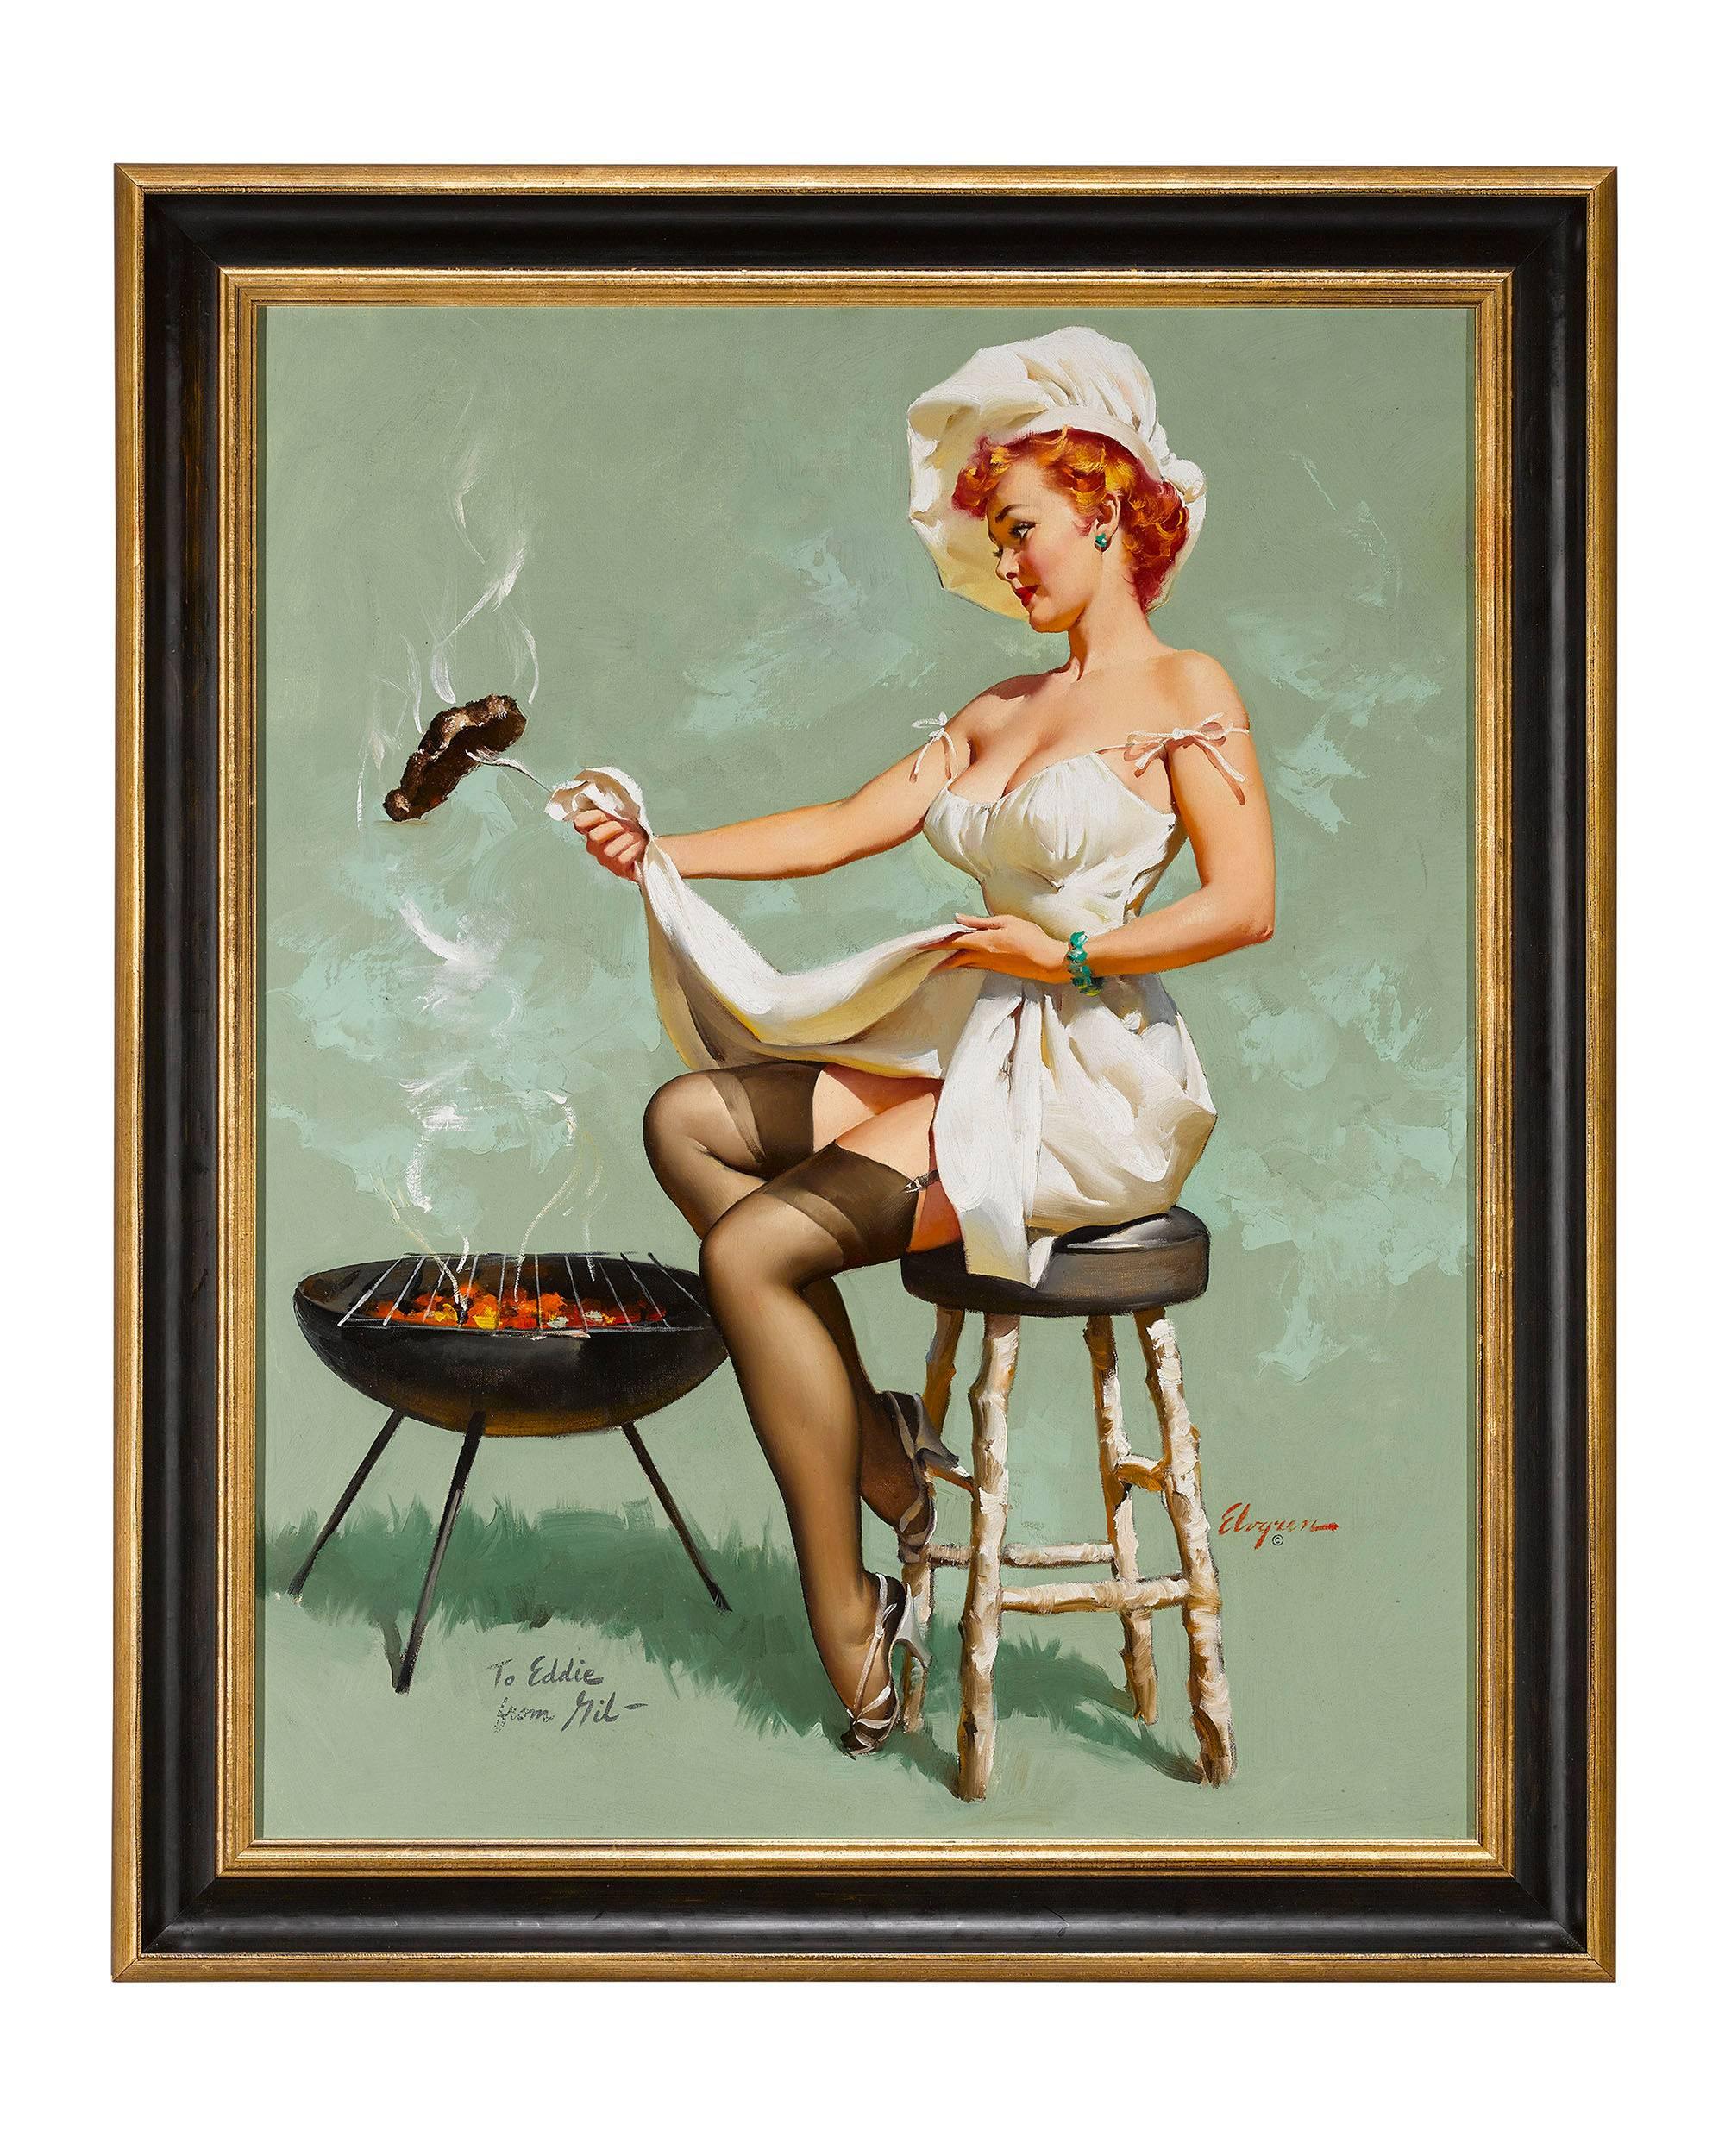 A Lot at Steak - Painting by Gil Elvgren